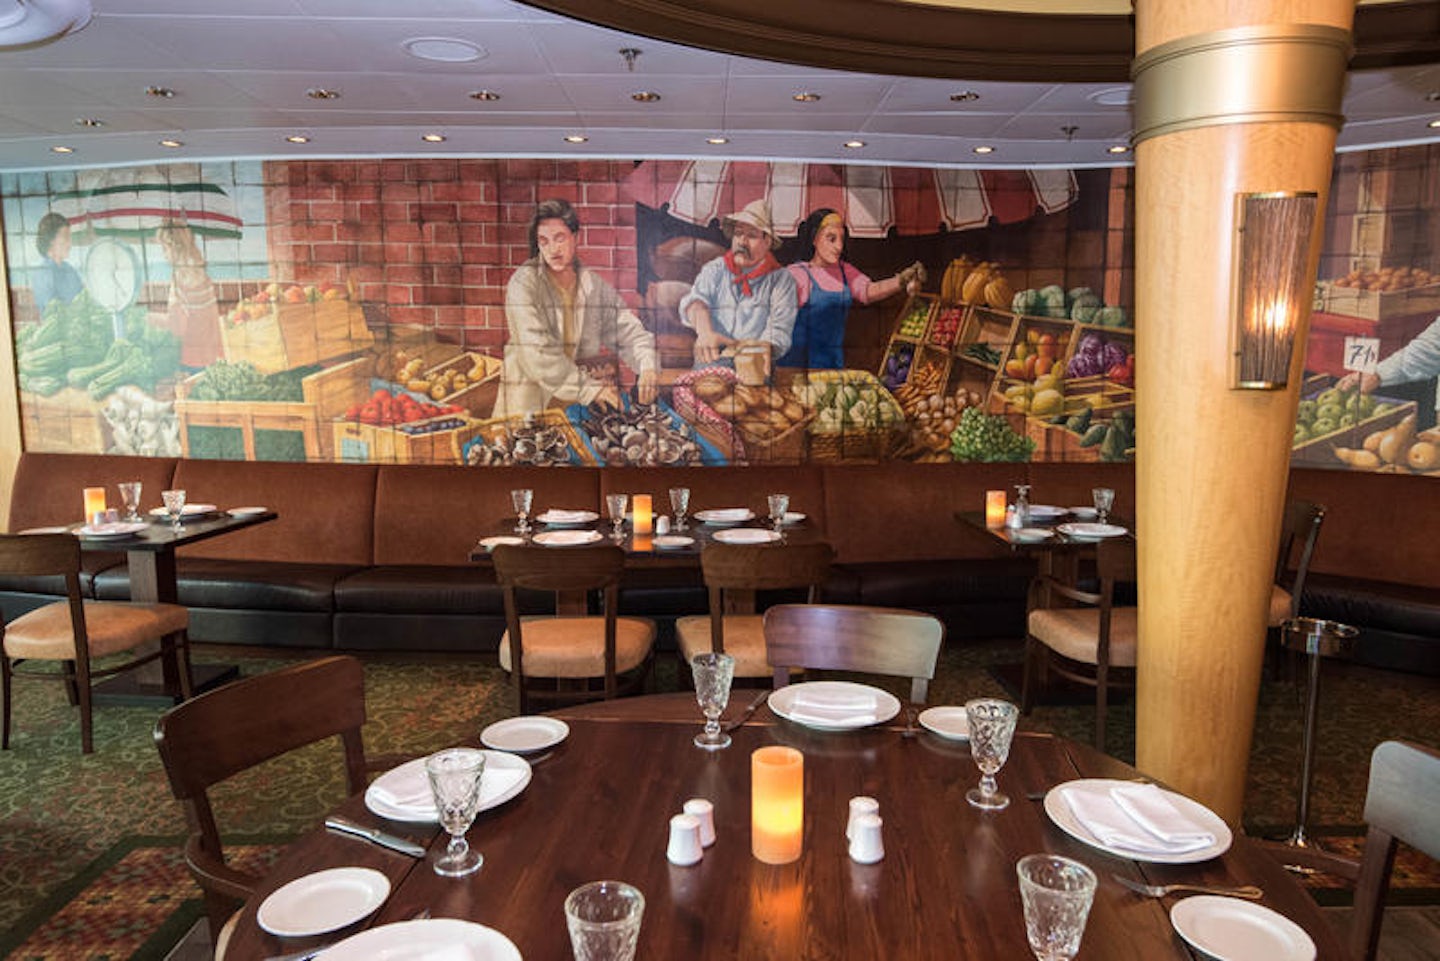 Giovanni's Table on Brilliance of the Seas